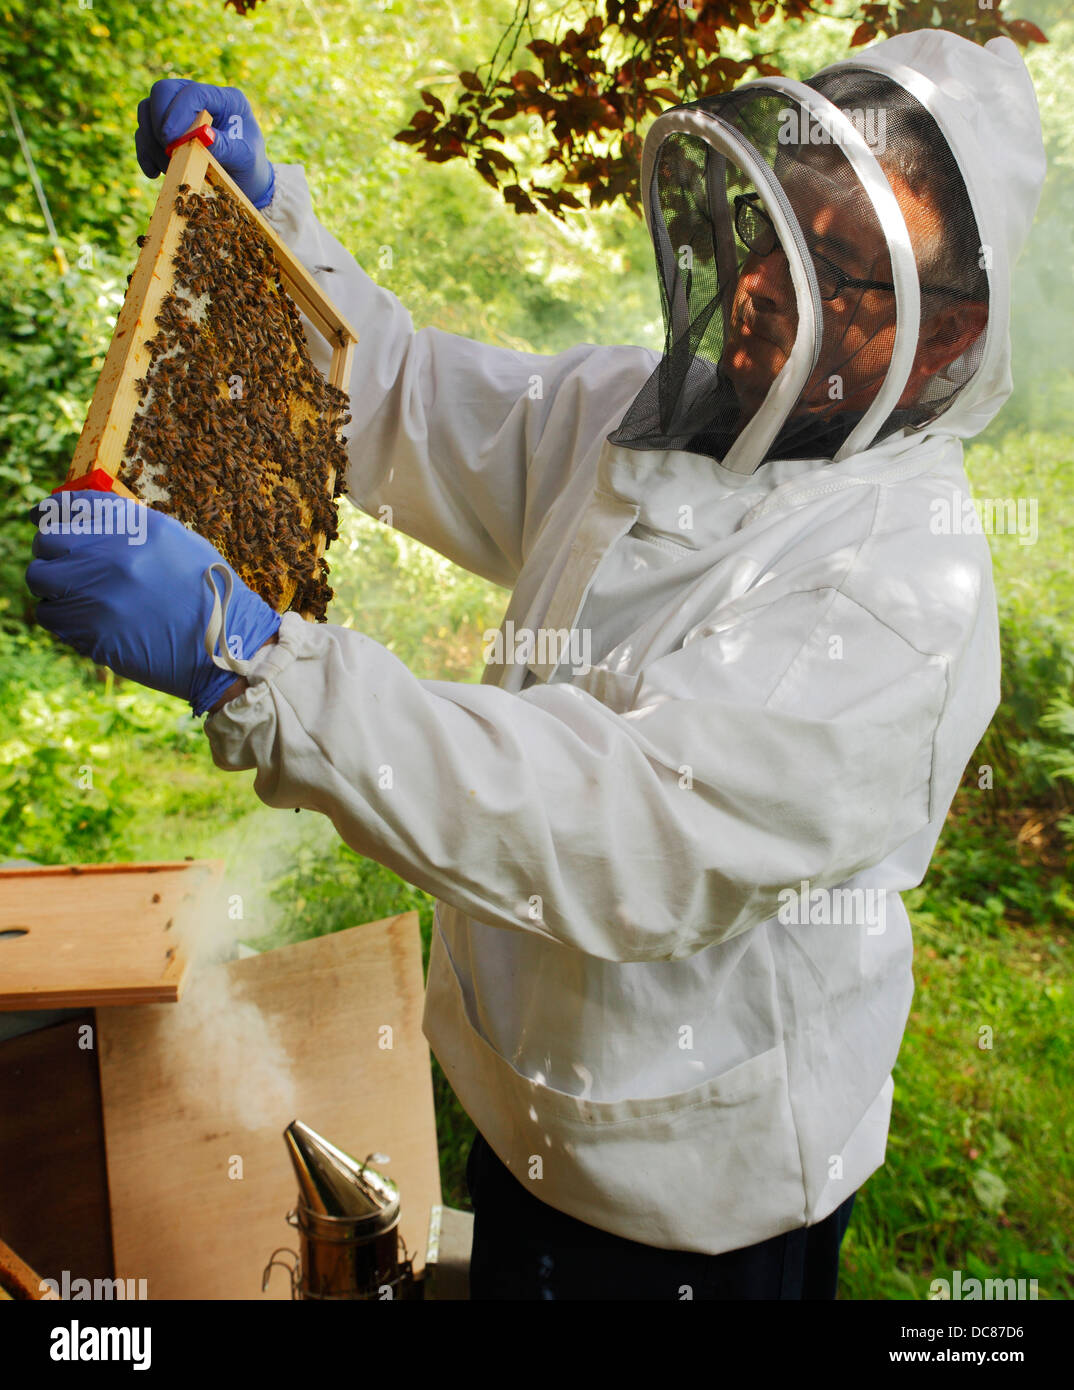 Beekeeper attending to his beehive. Stock Photo